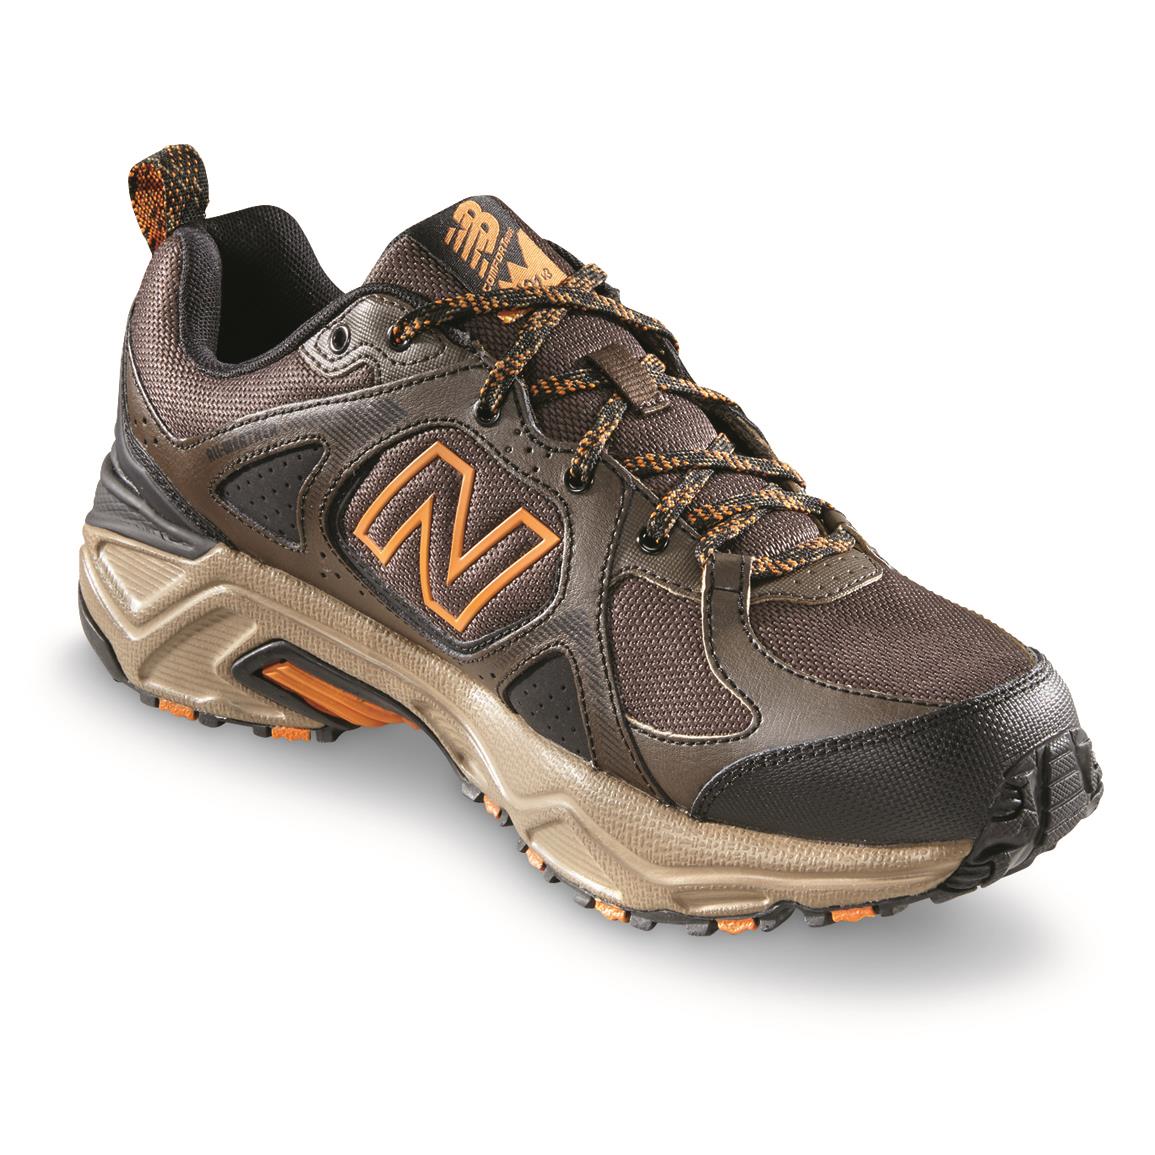 481v3 Water Resistant Trail Shoes 